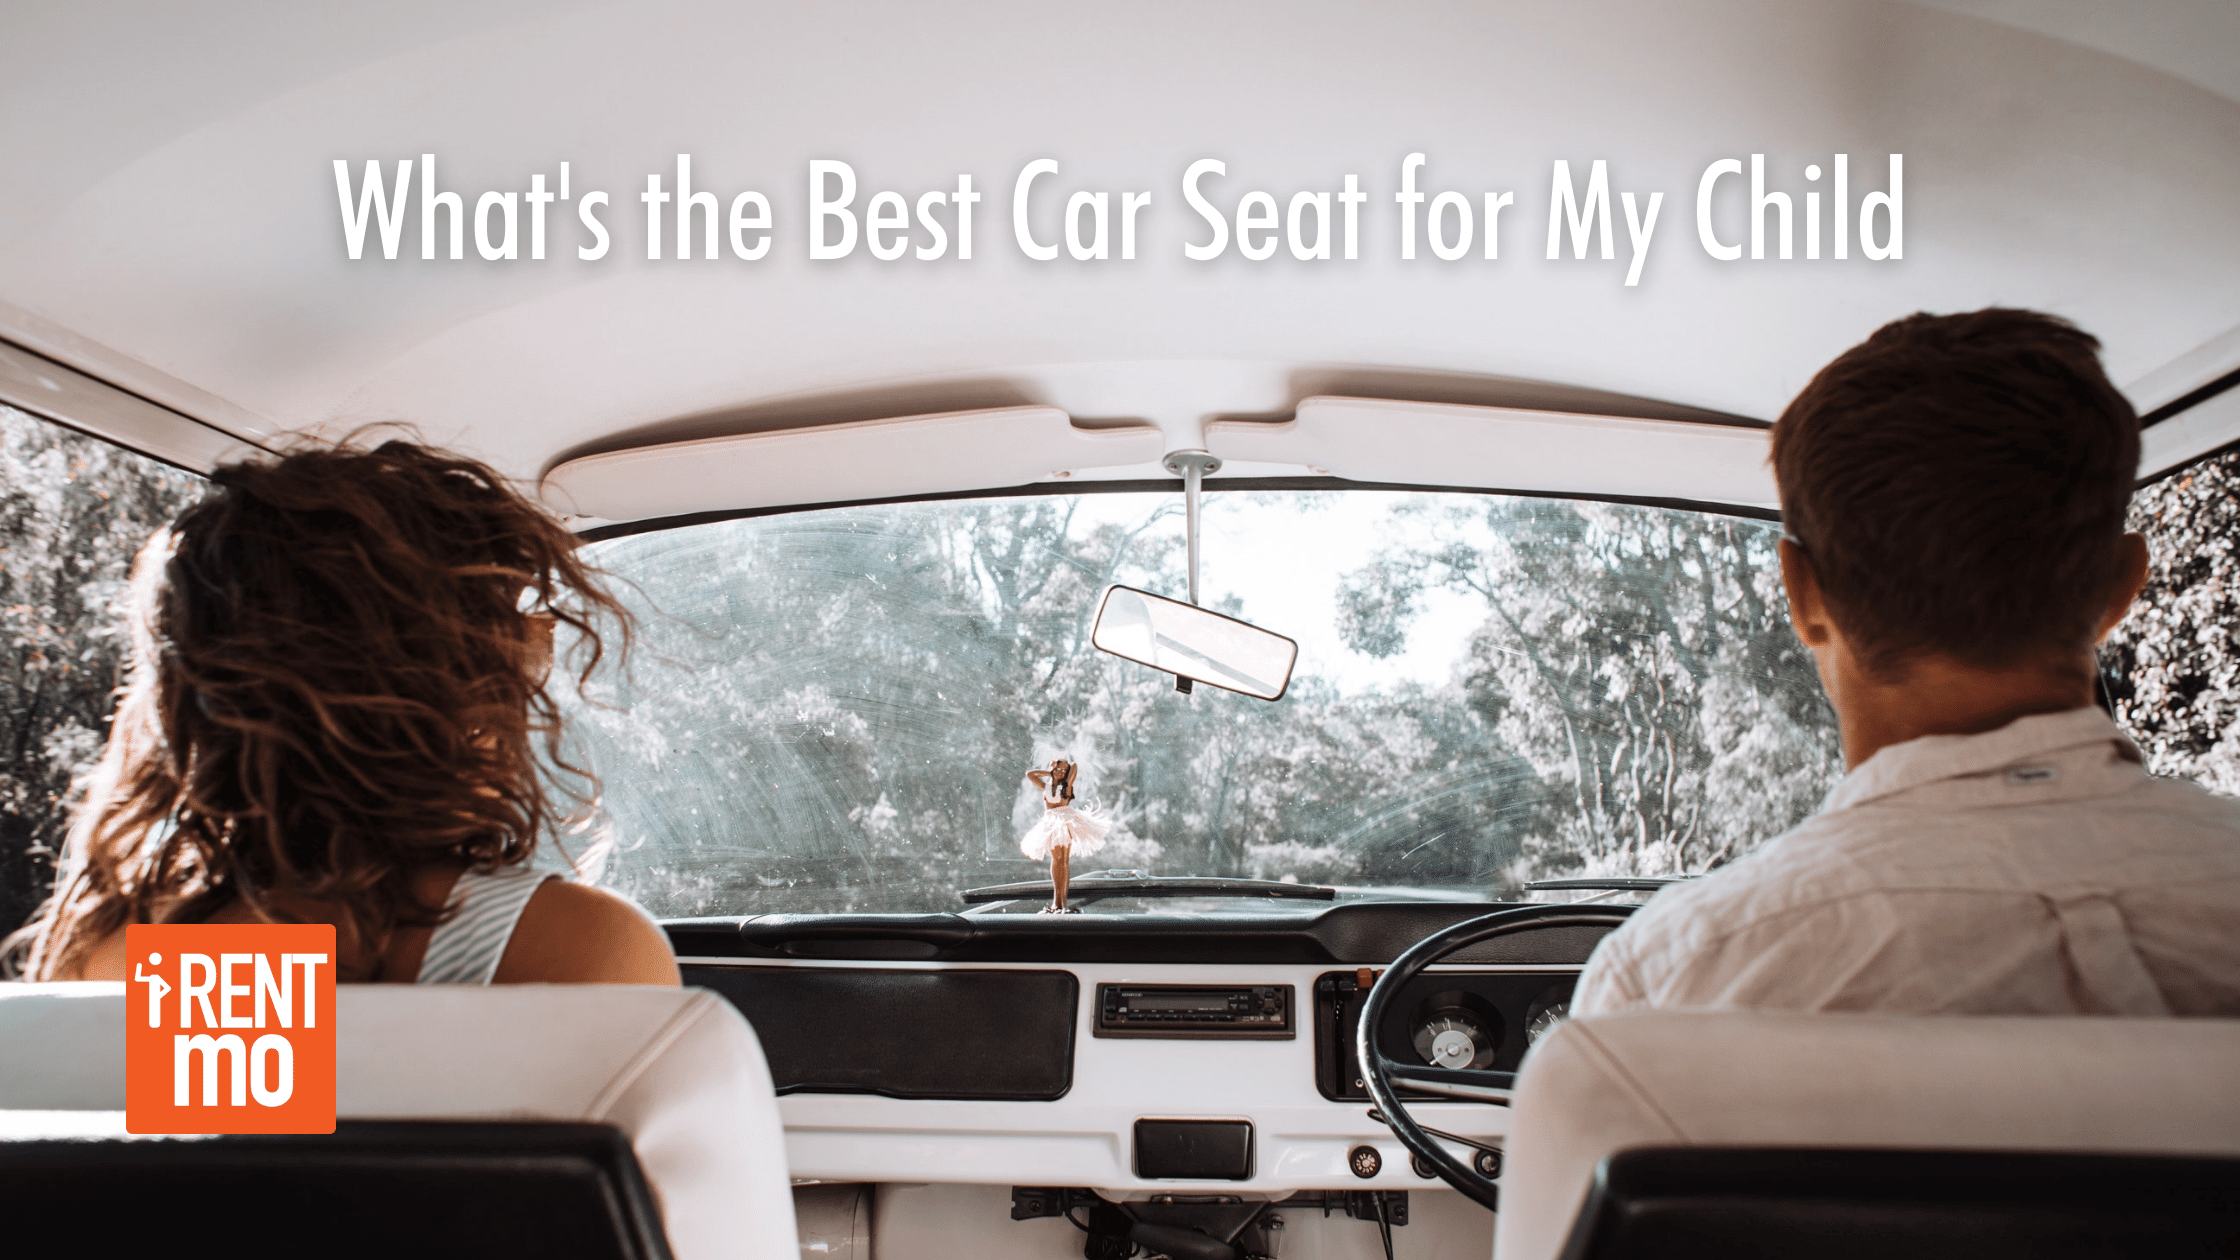 What’s the Best Car Seat for My Child